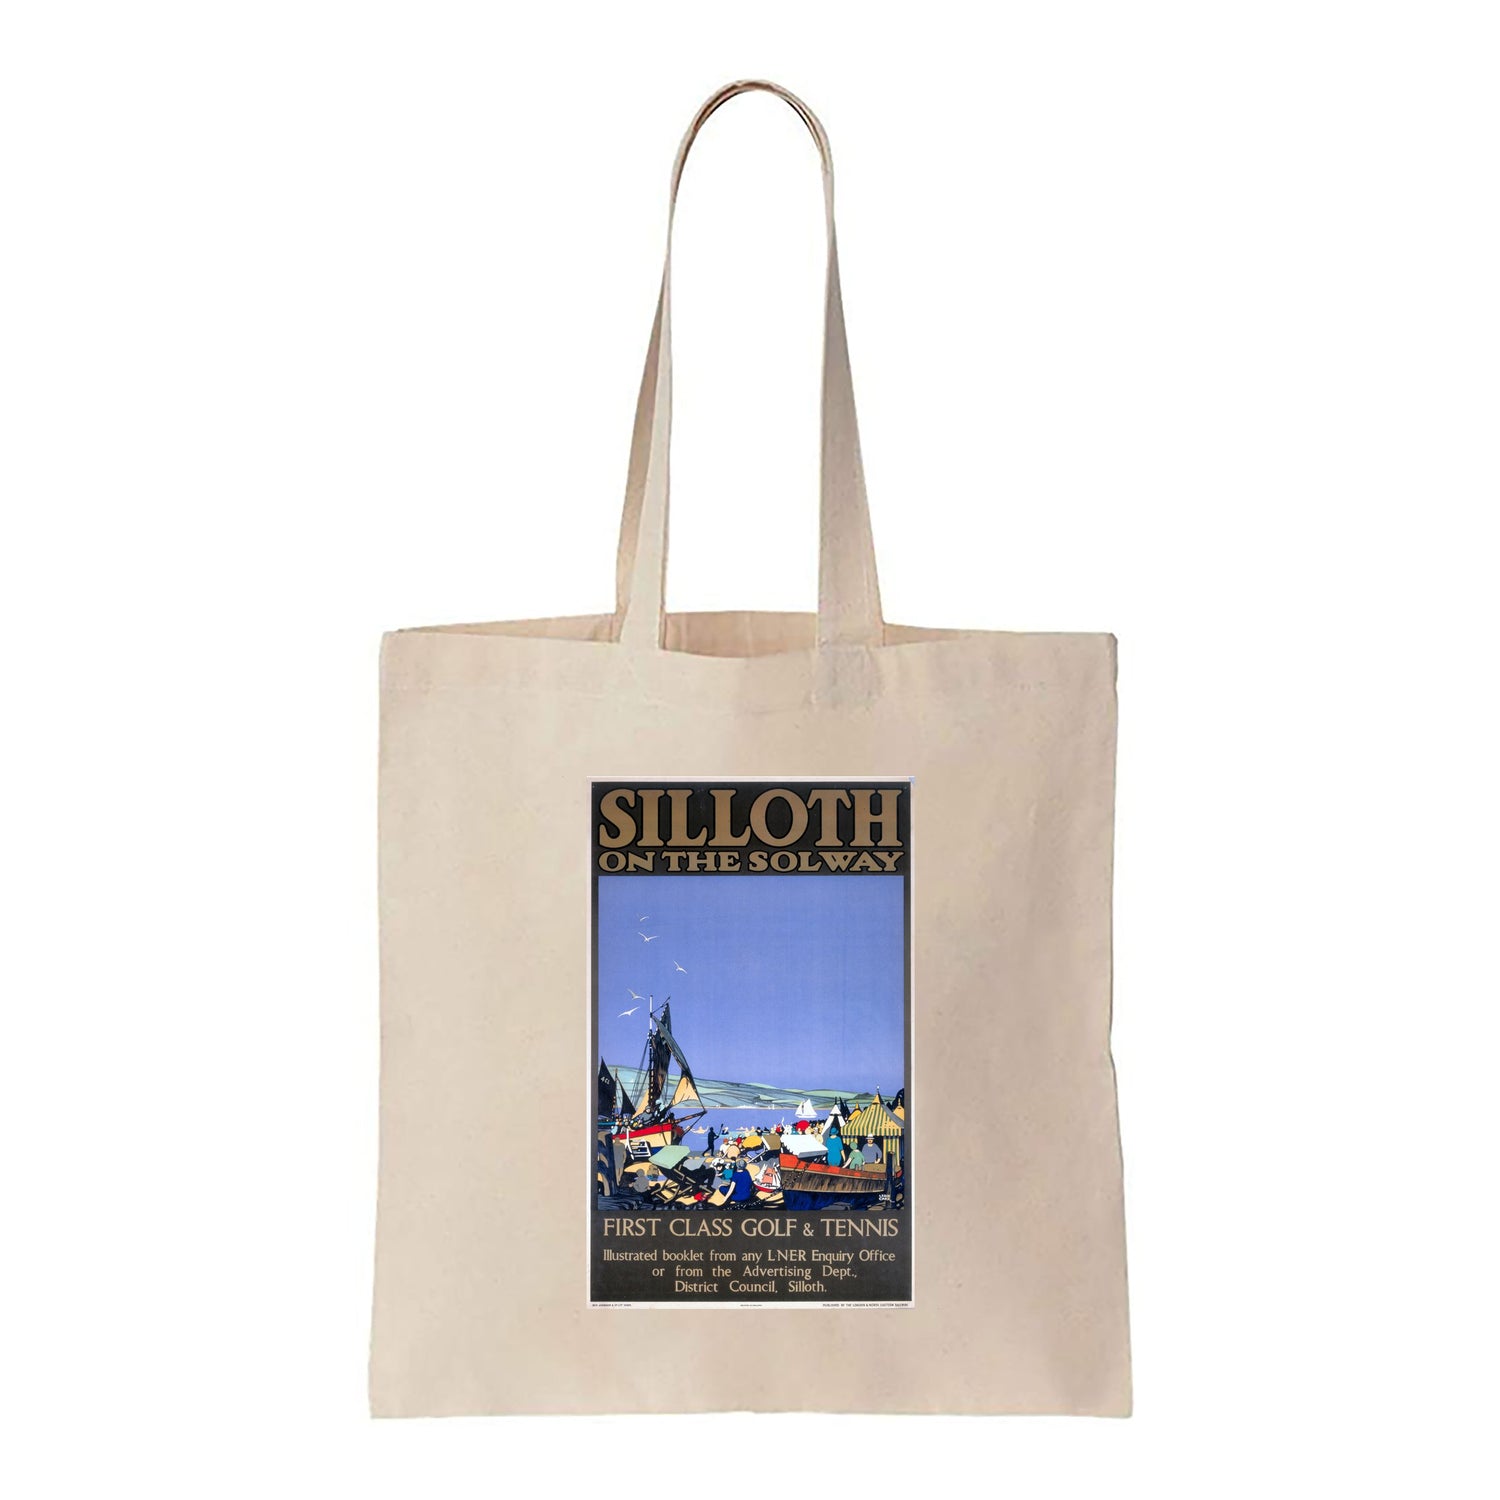 Silloth on the Solway - Canvas Tote Bag